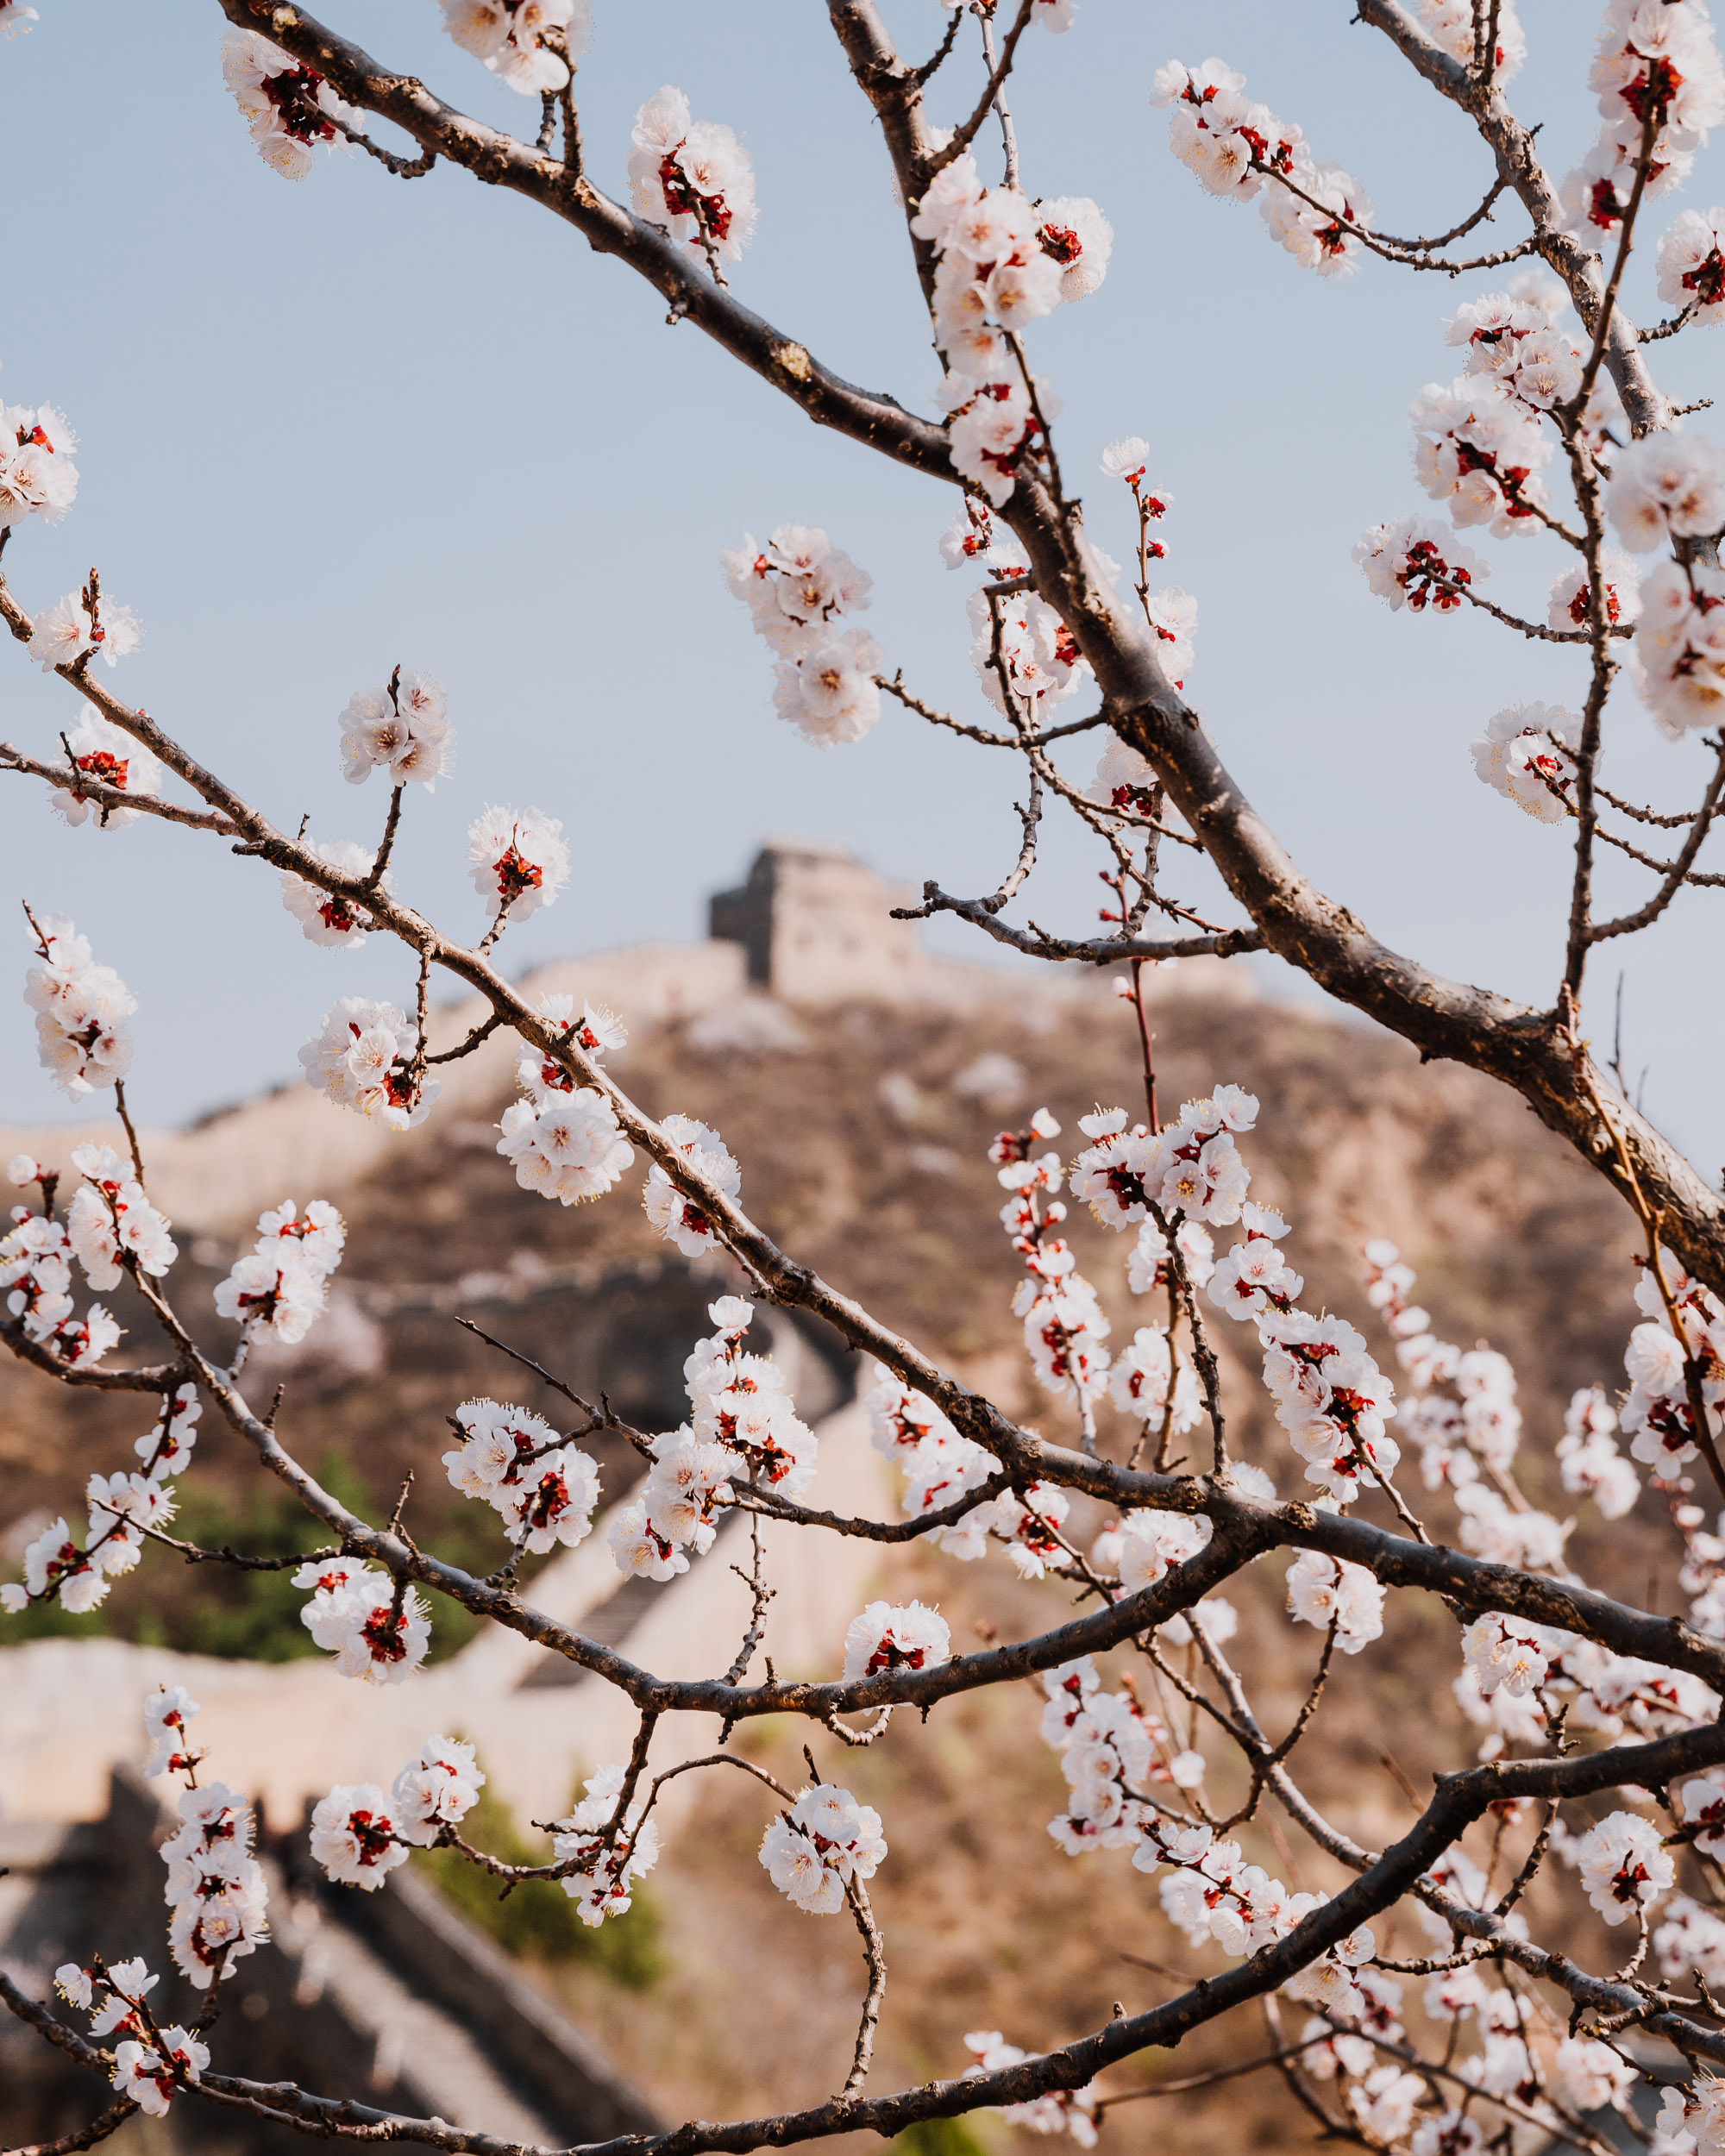 Apricot_Blossoms_Overlooking_Great_Wall